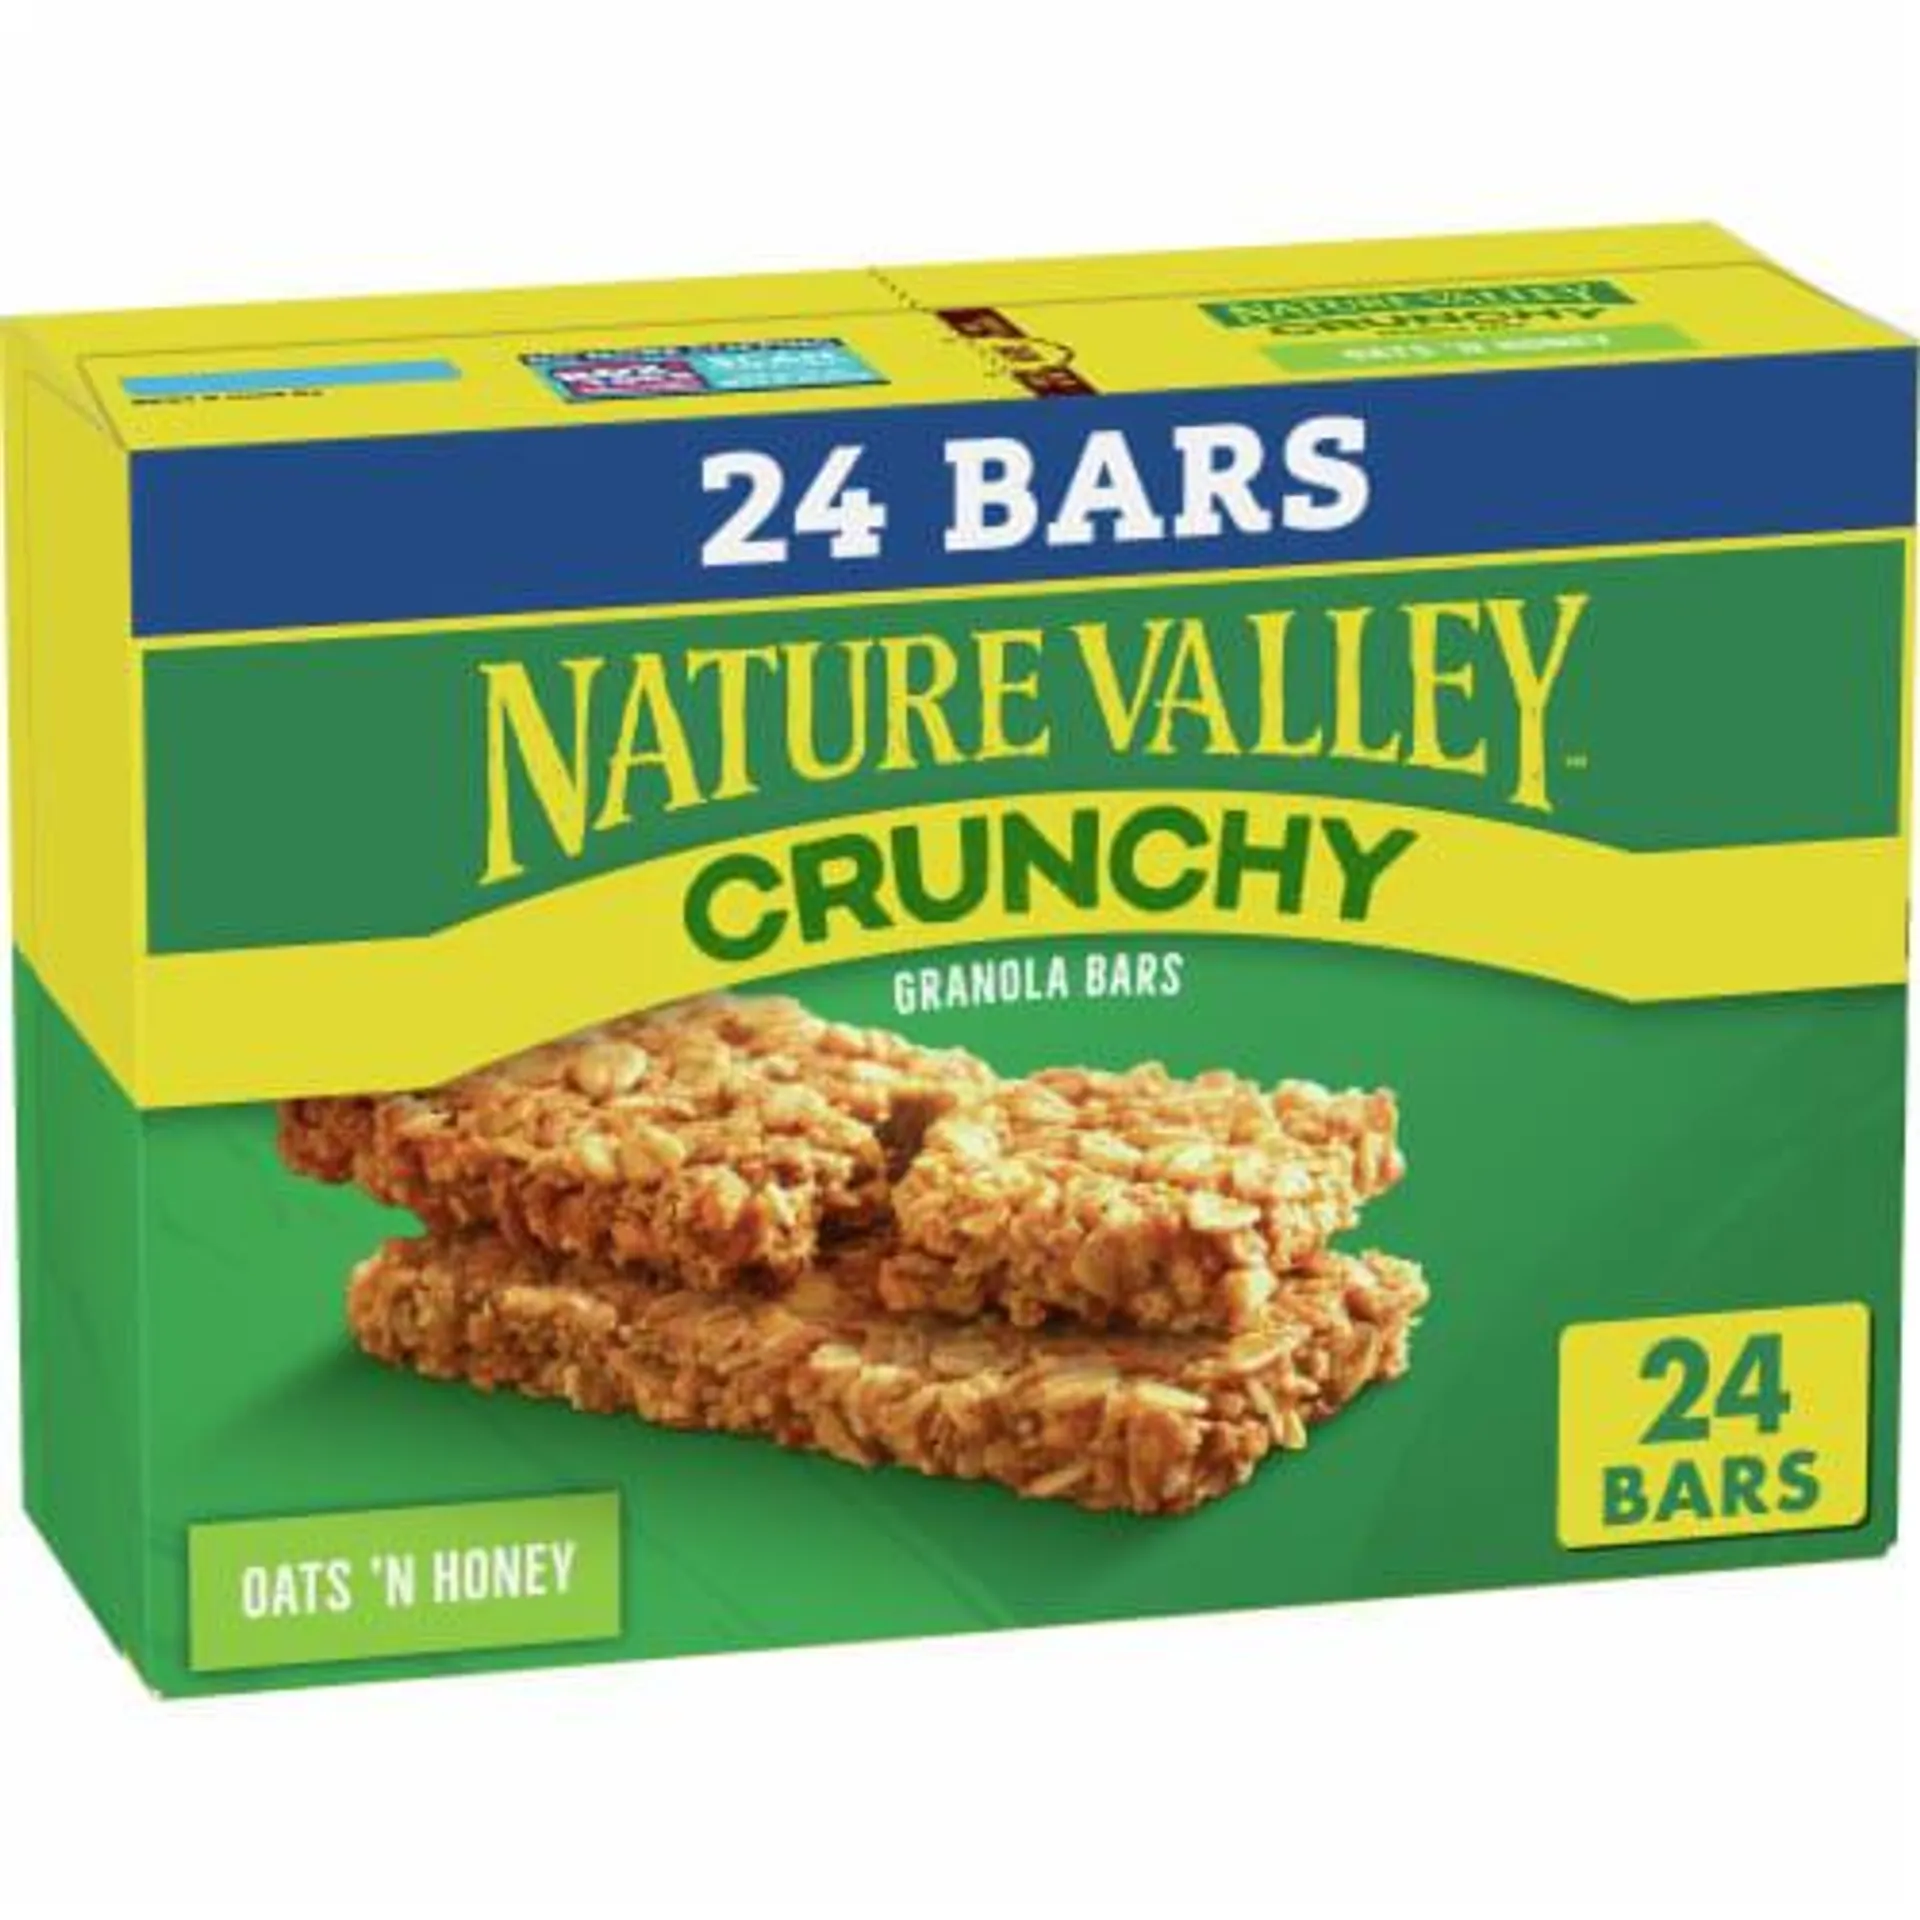 Nature Valley Oats and Honey Crunchy Granola Bars Value Pack